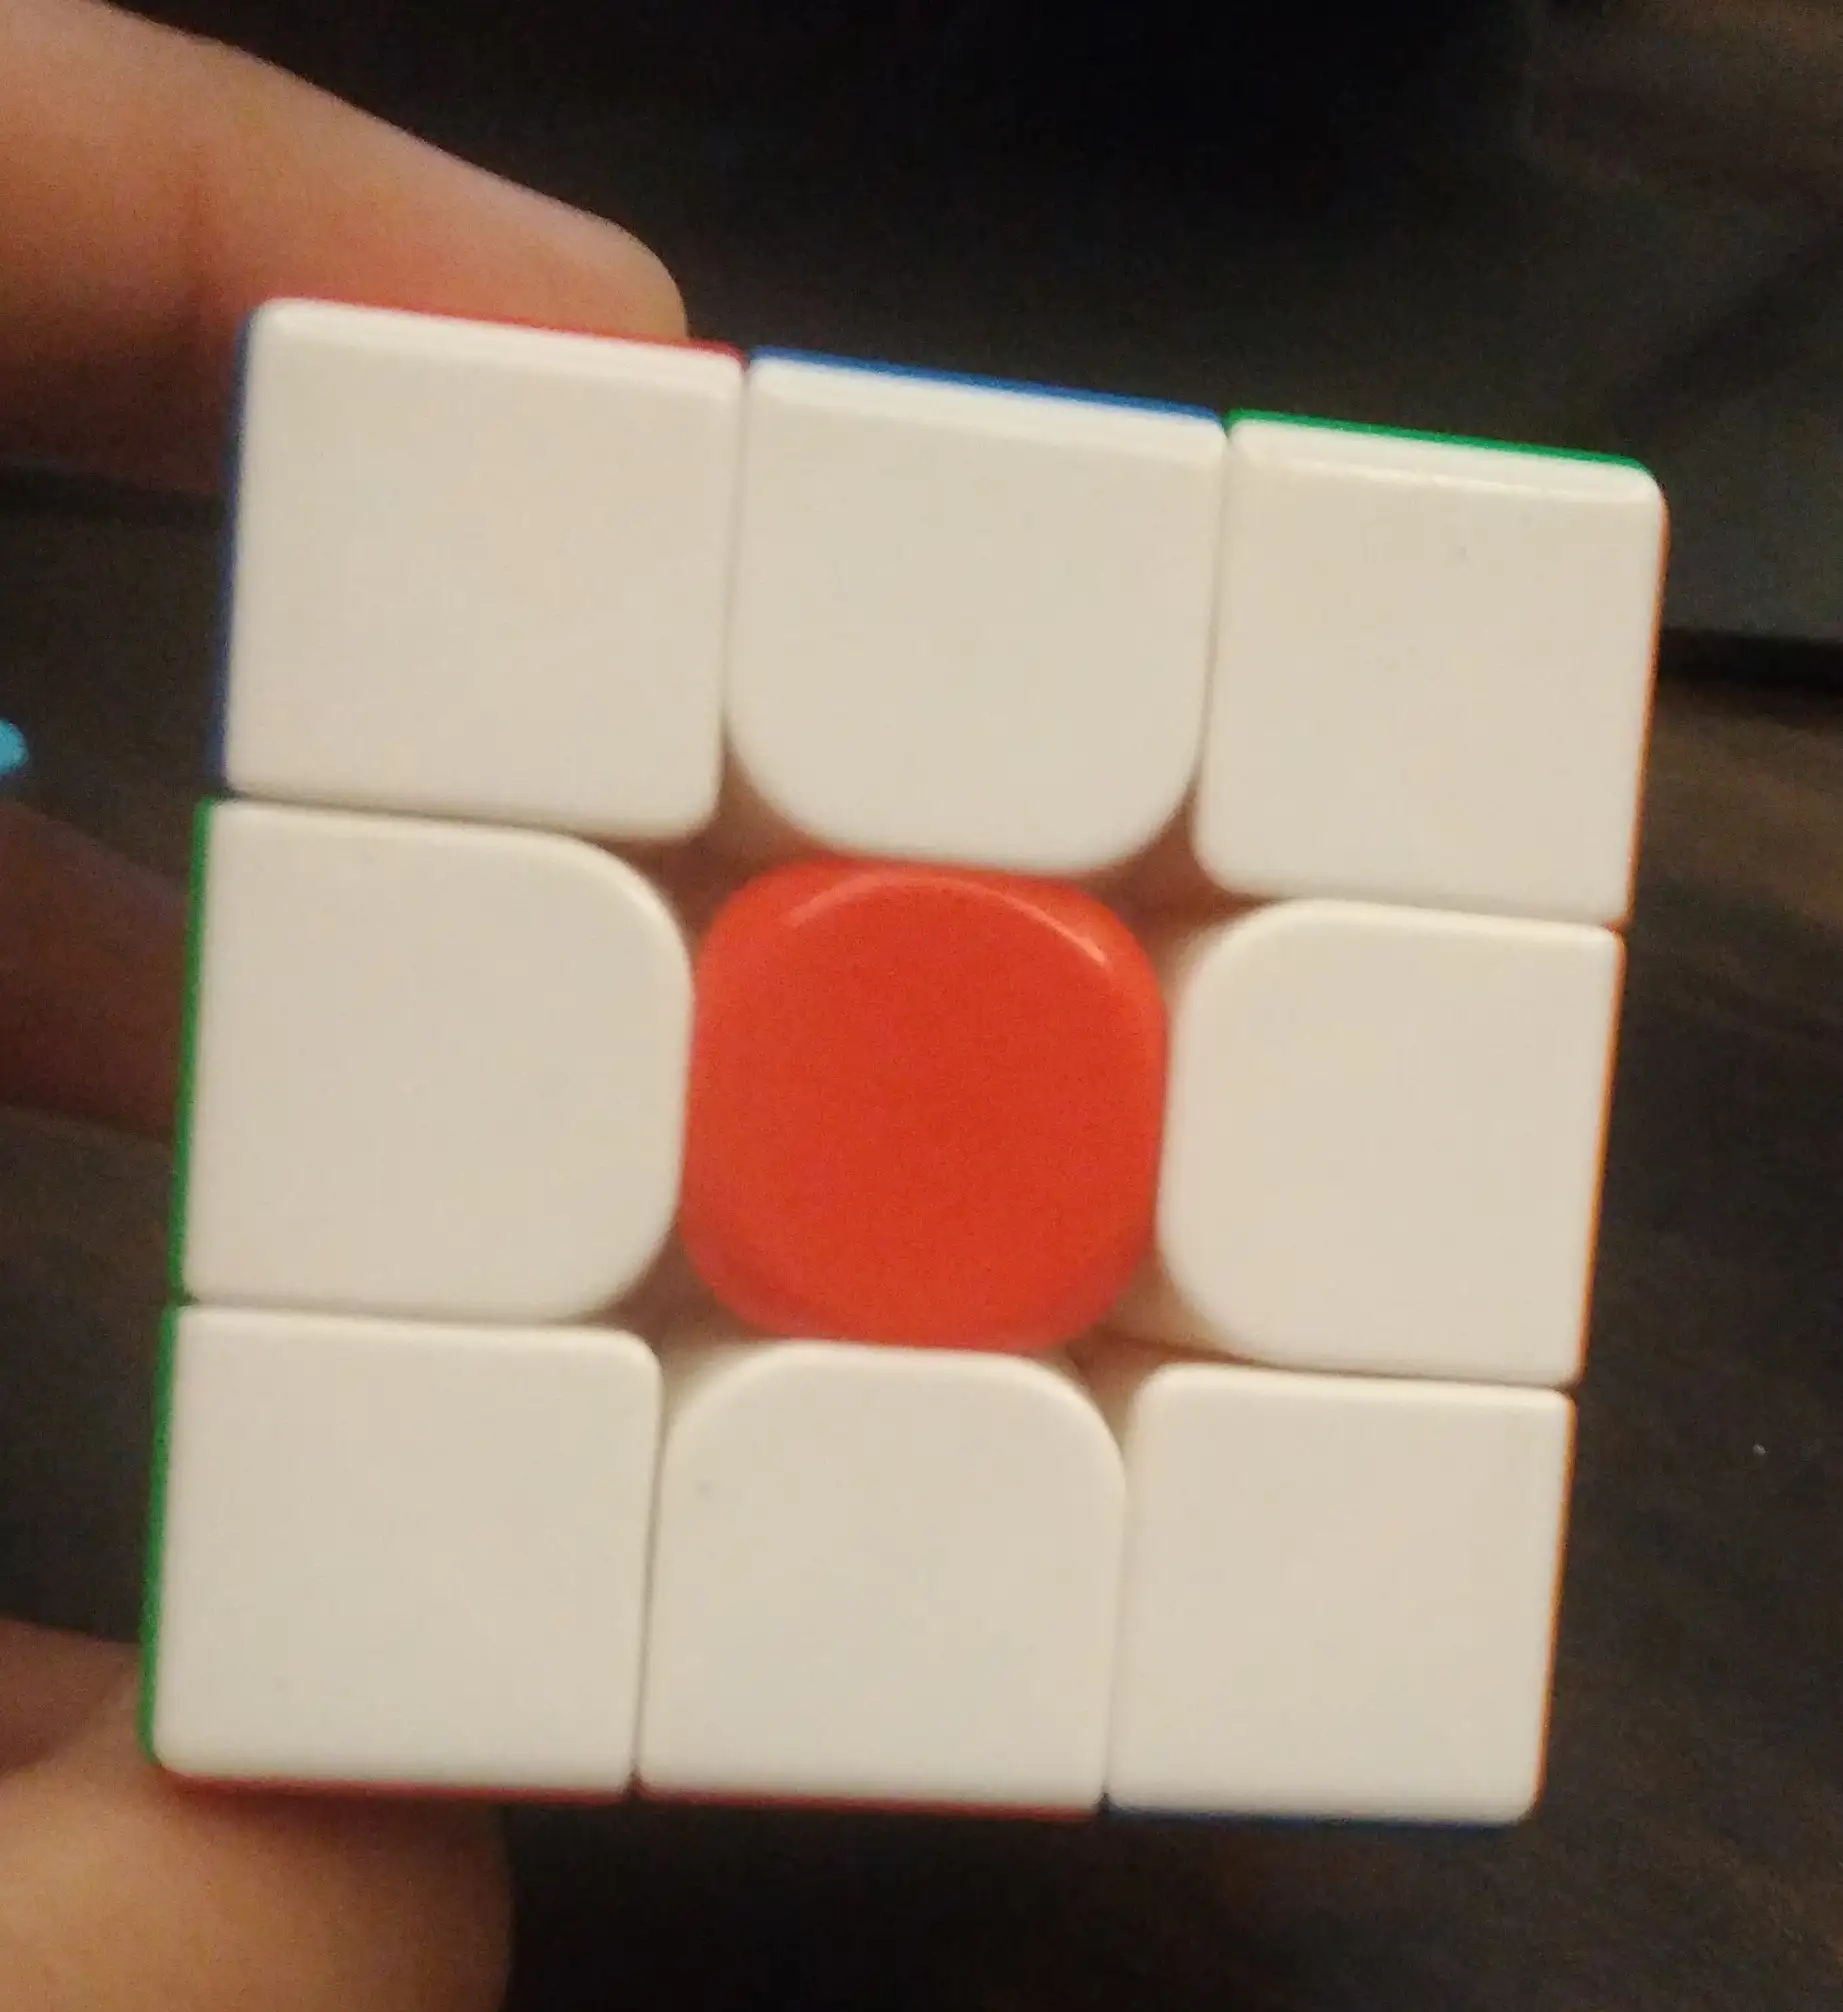 Japanese flag pattern on a 3x3 cube